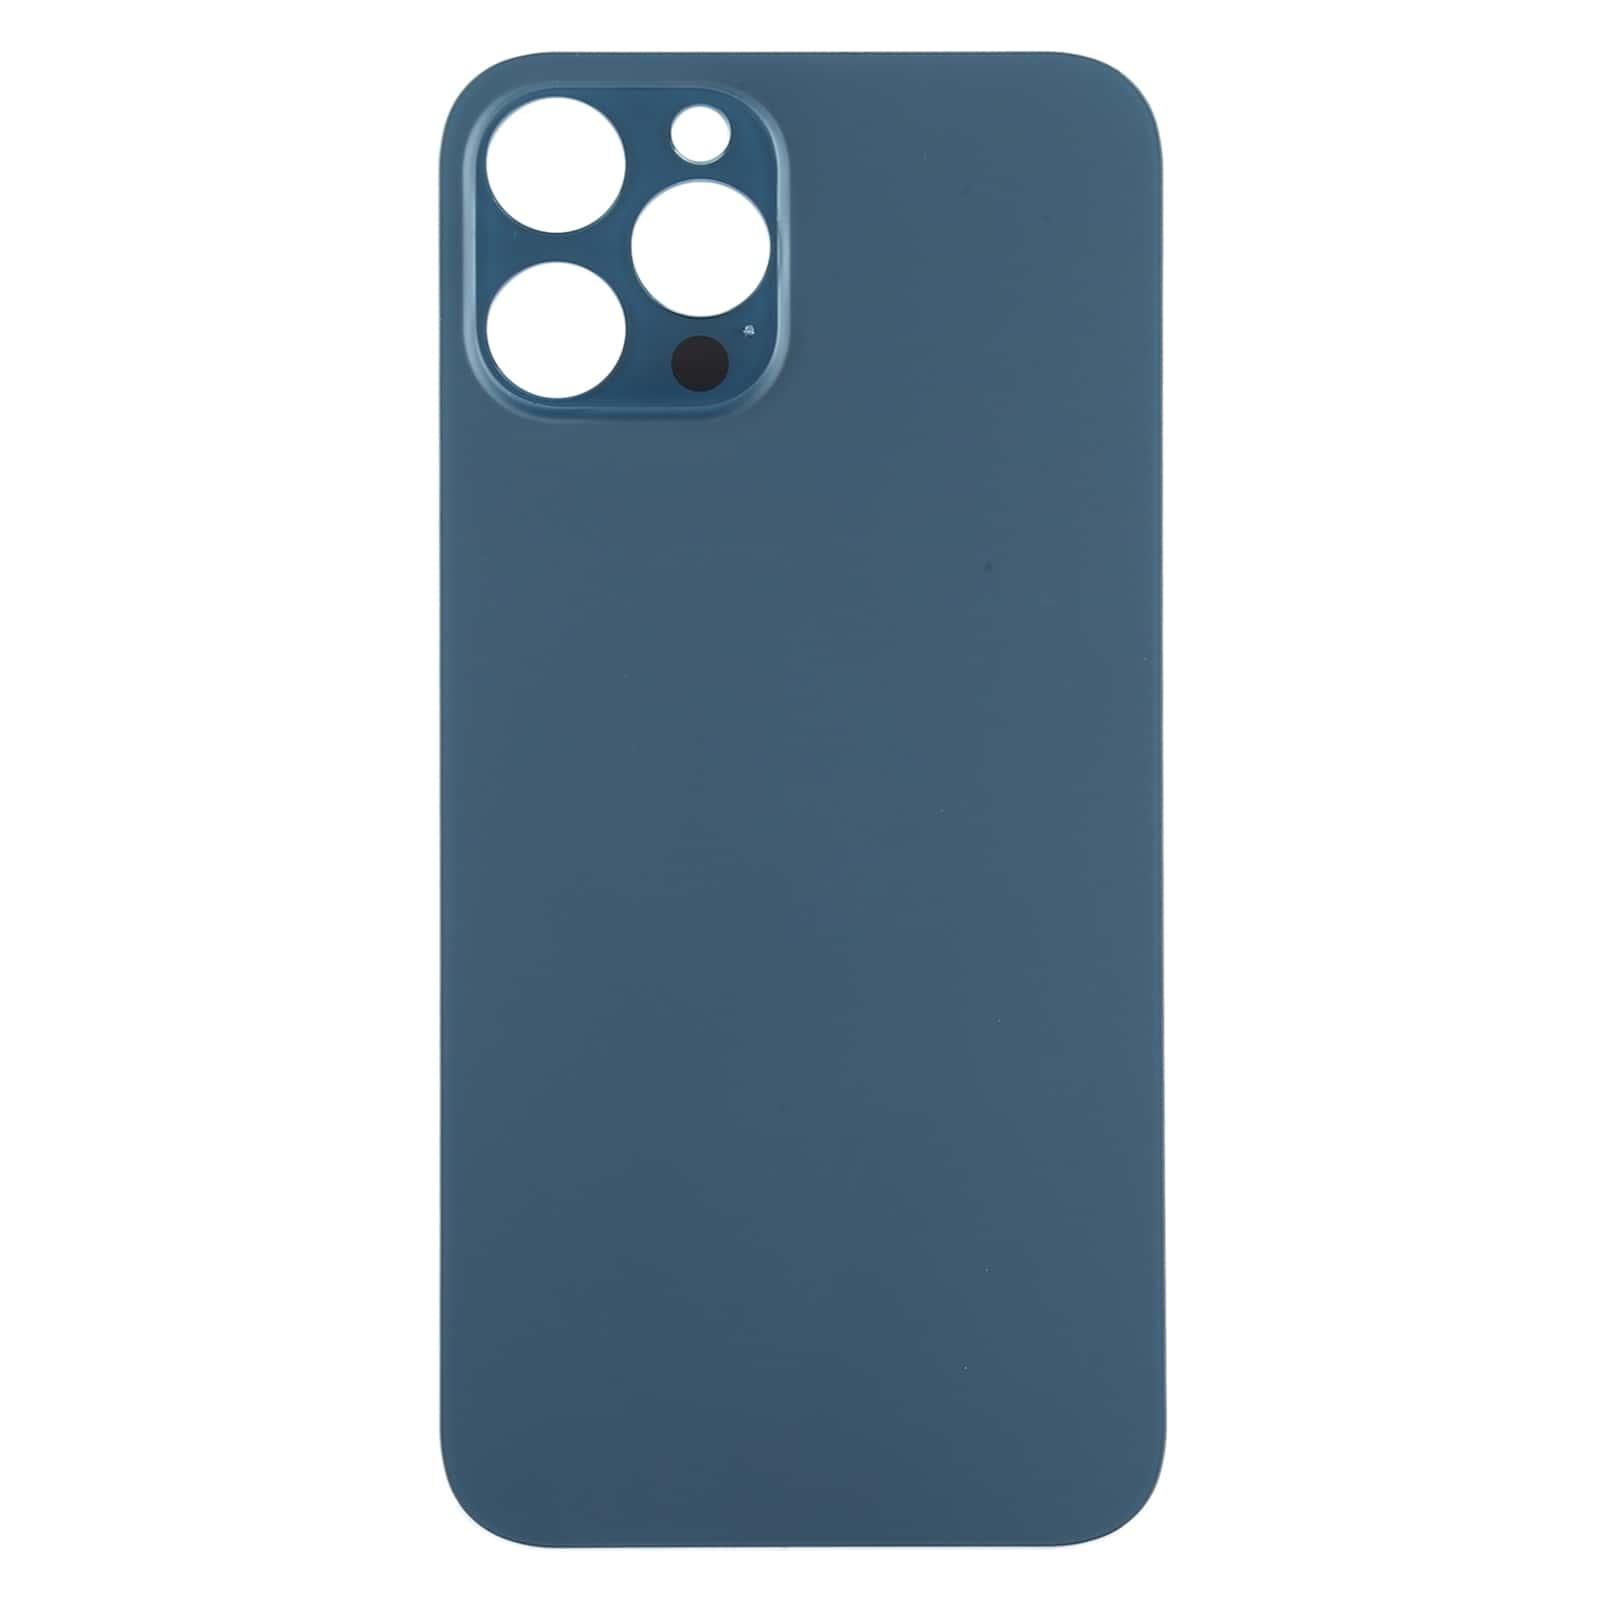 Back Glass Panel for iPhone 12 Pro Max Blue Big Camera Hole